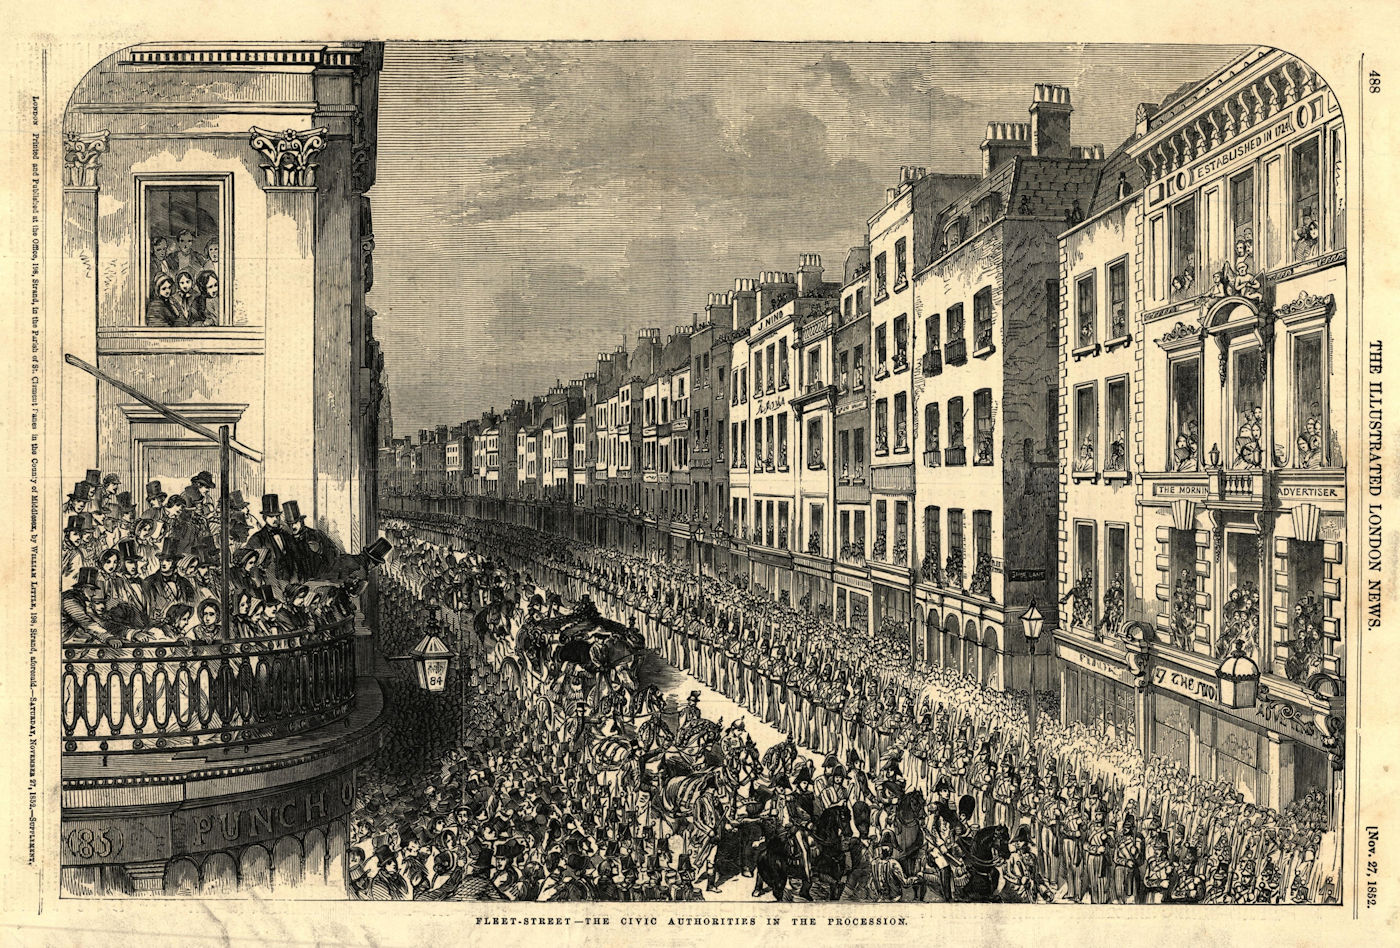 Fleet Street - the civic authorities in the procession. London 1852 old print